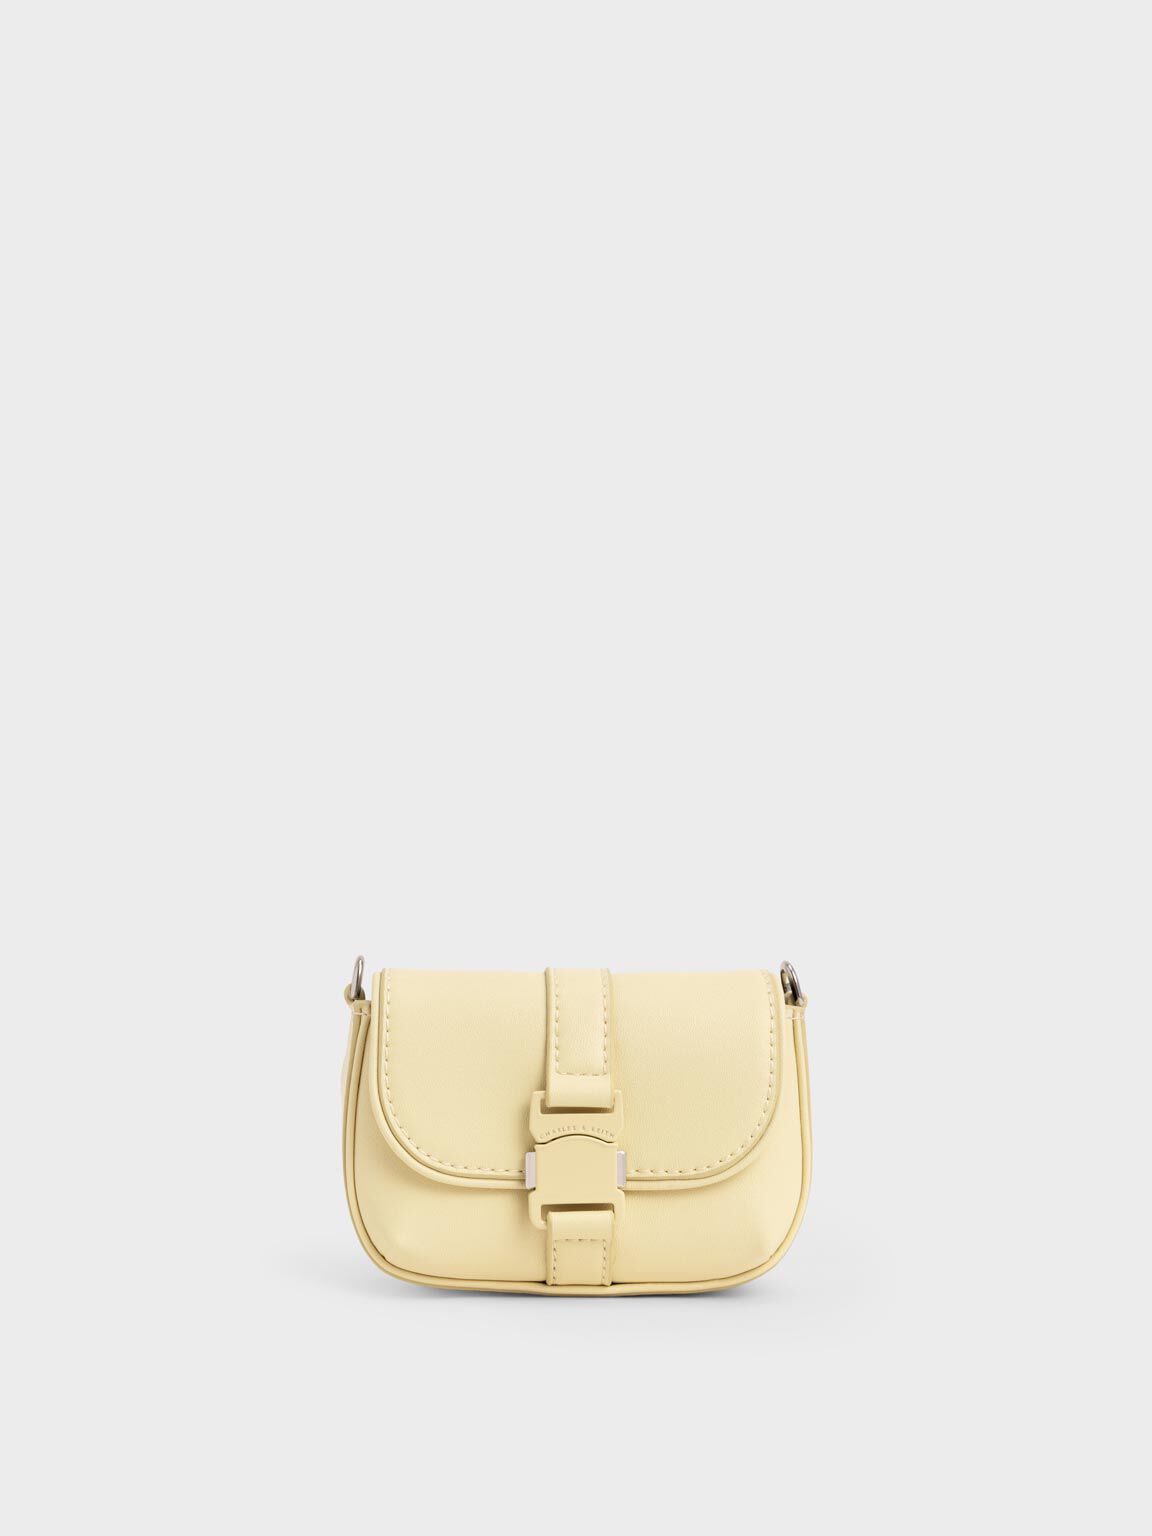 Women's Mini & Small Bags | Shop Online - CHARLES & KEITH SG